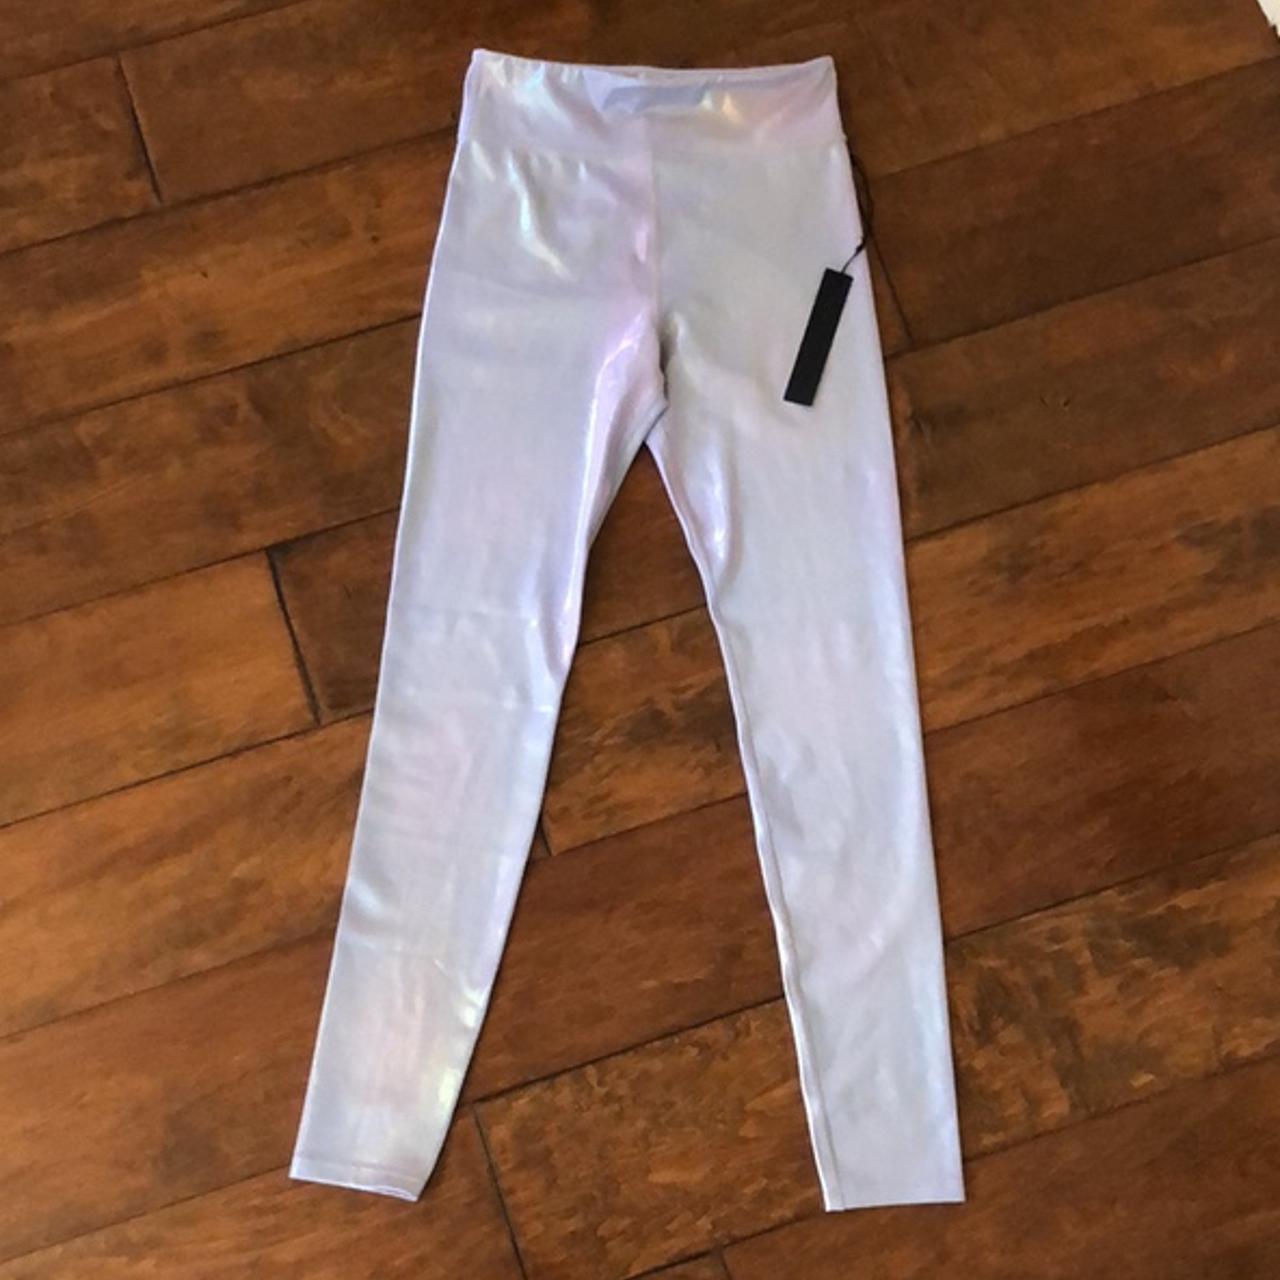 Brand new and tags attached, Carbon38 leggings in a - Depop